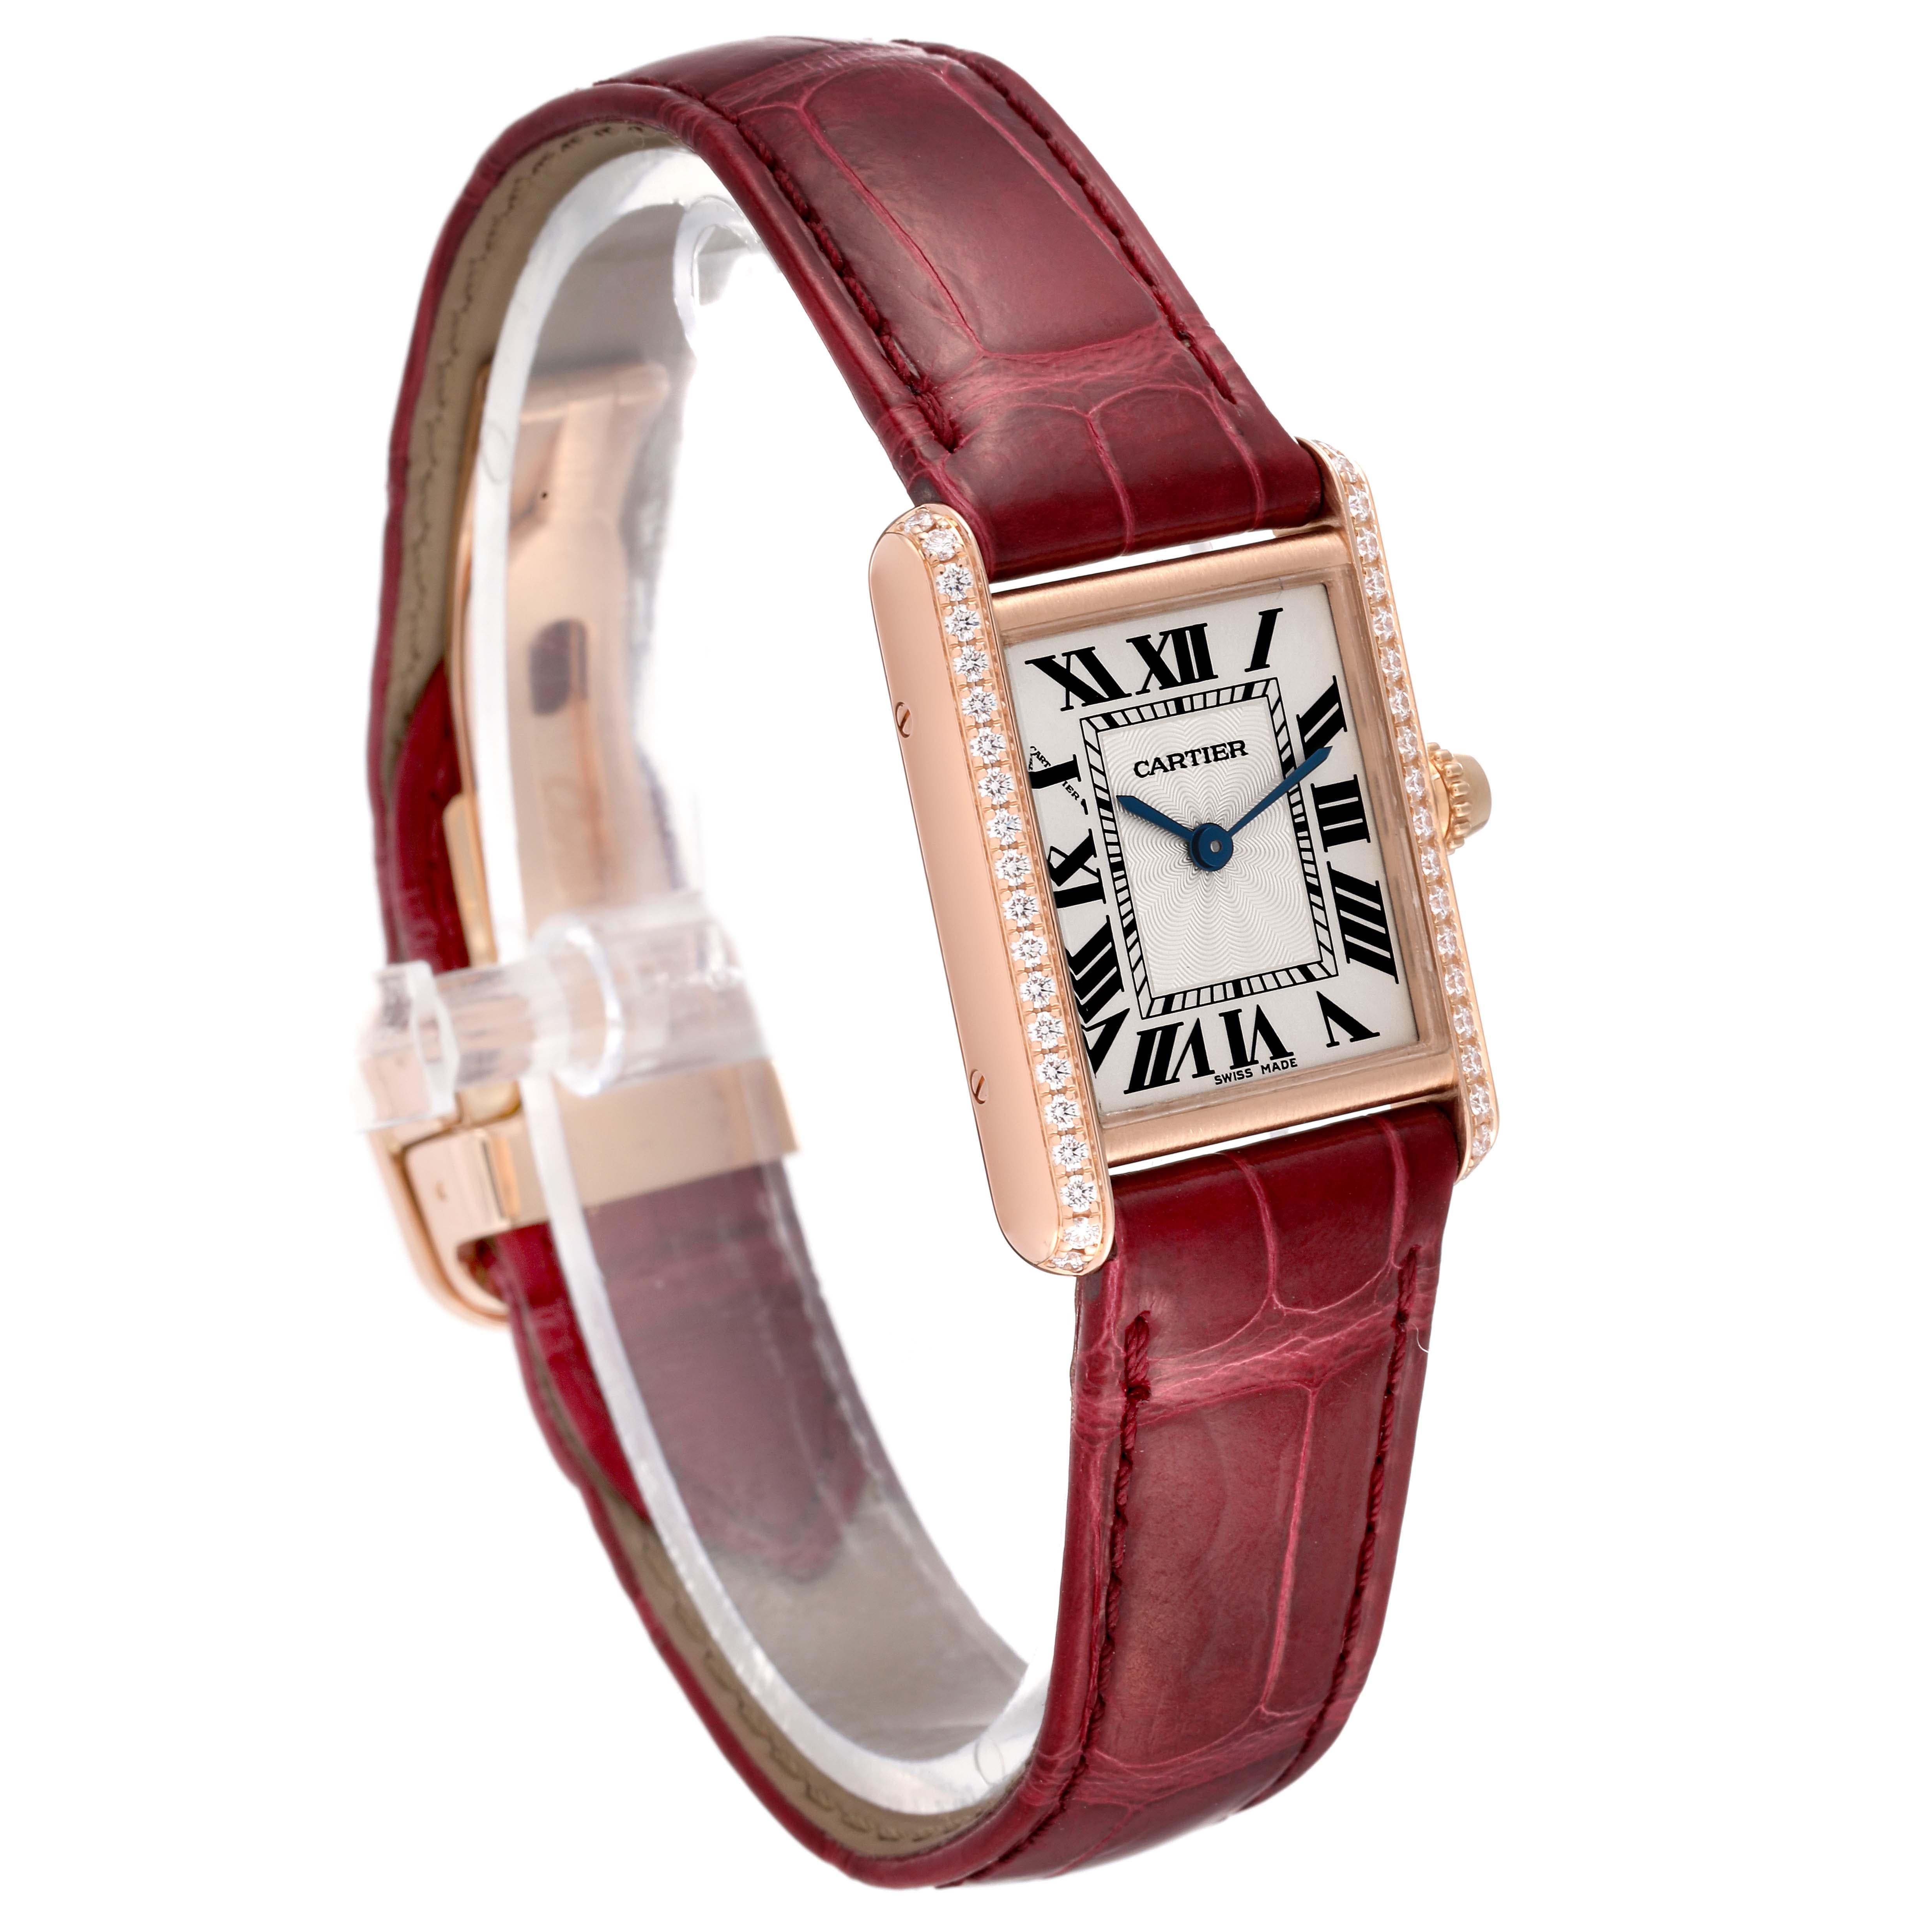 Cartier Tank Louis Rose Gold Diamond Ladies Watch WJTA0010 Box Card In Excellent Condition For Sale In Atlanta, GA